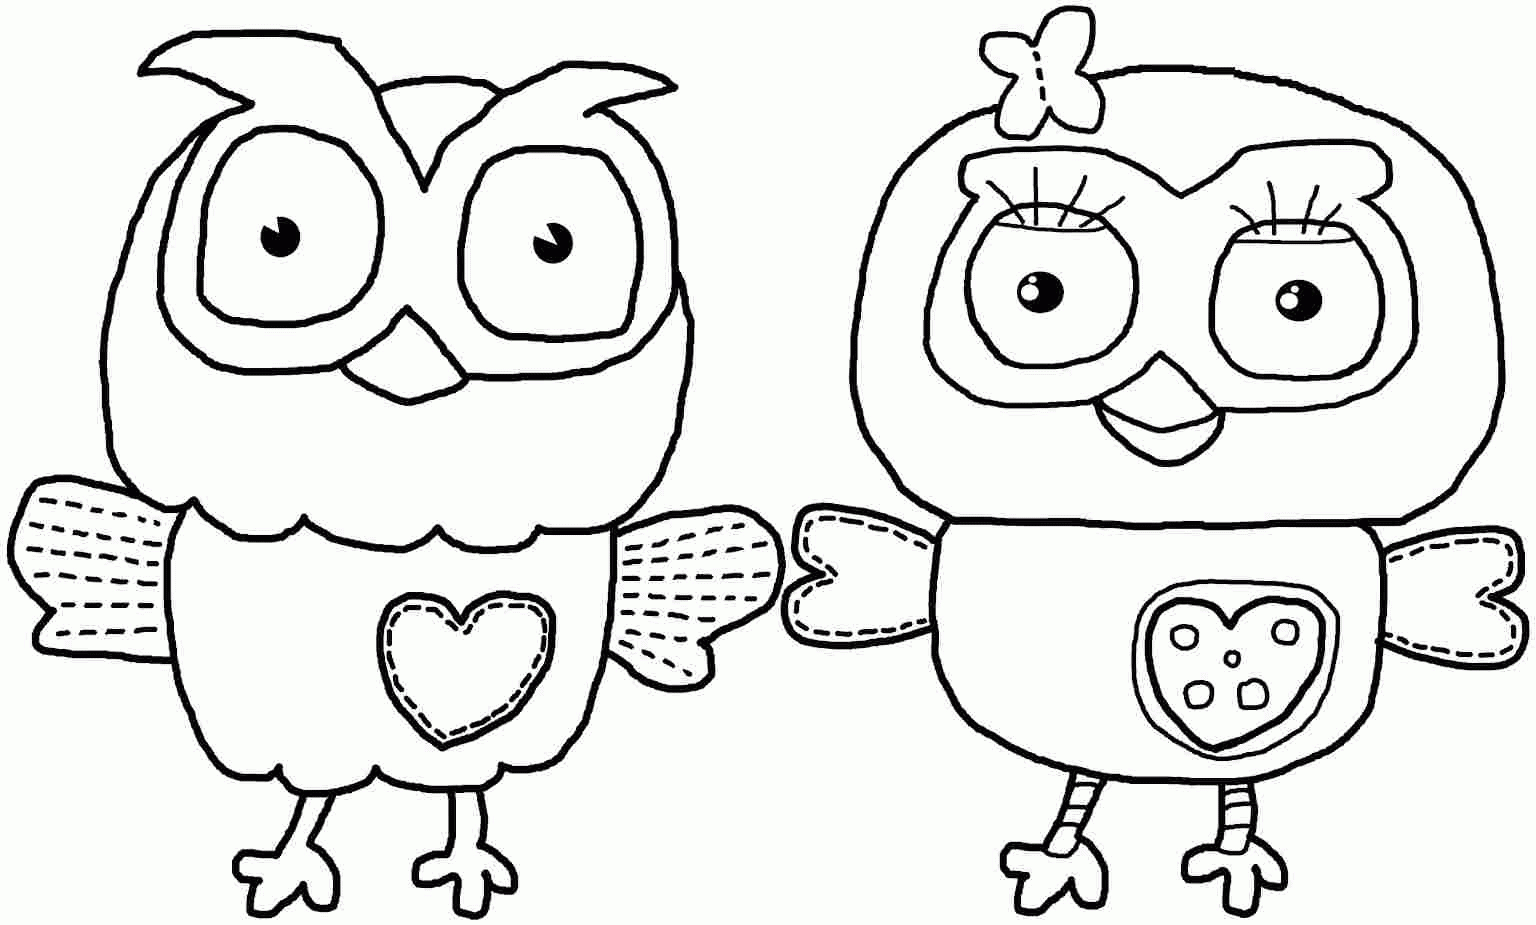 Free Printable Coloring Pages Of Flowers For Kids - Coloring Home - Free Printable Color Sheets For Preschool